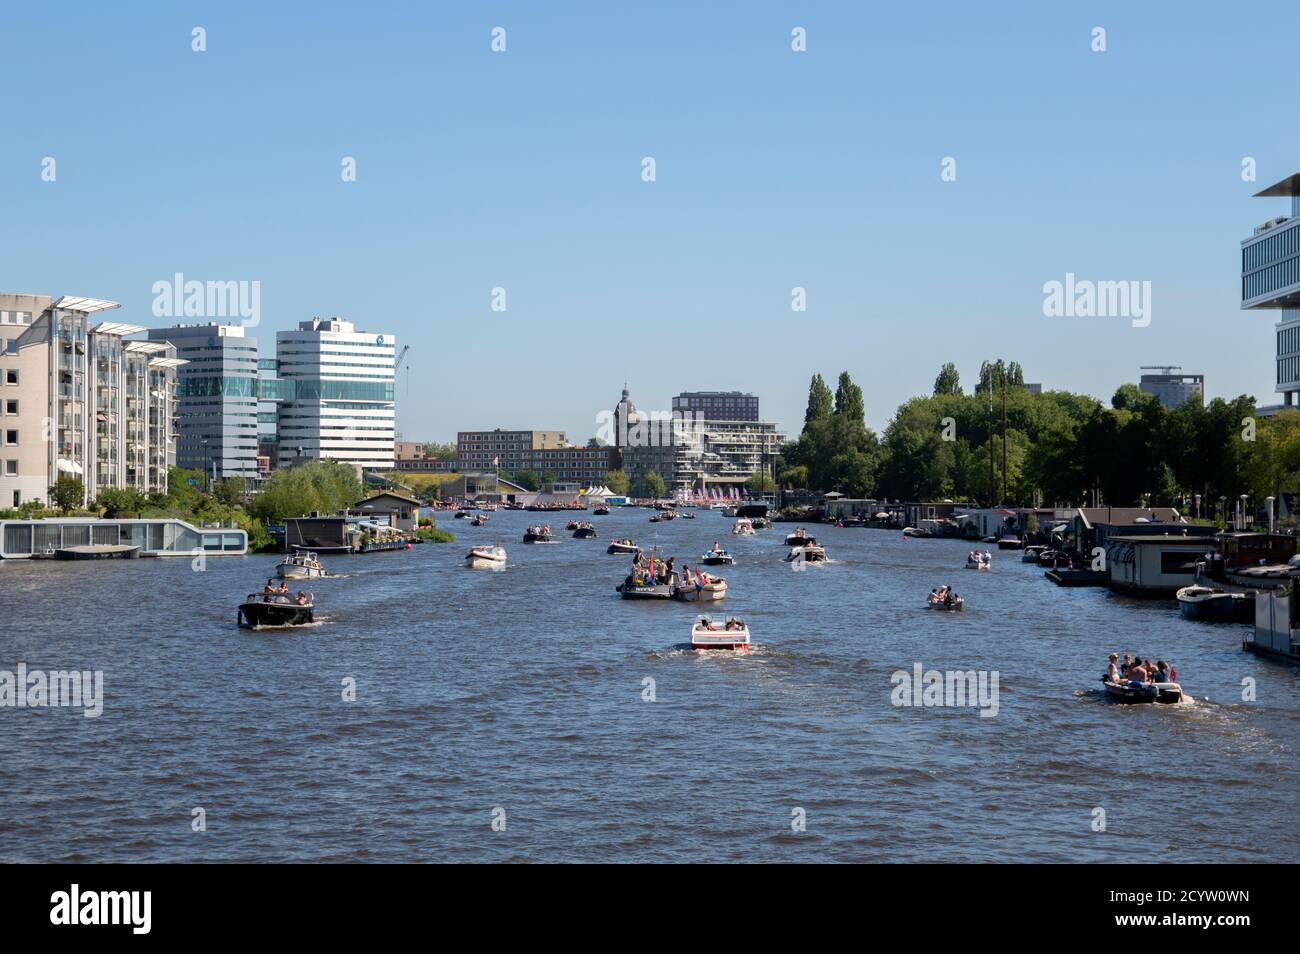 Many Boats On The Amstel River At Amsterdam The Netherlands 30-6-2019 Stock Photo